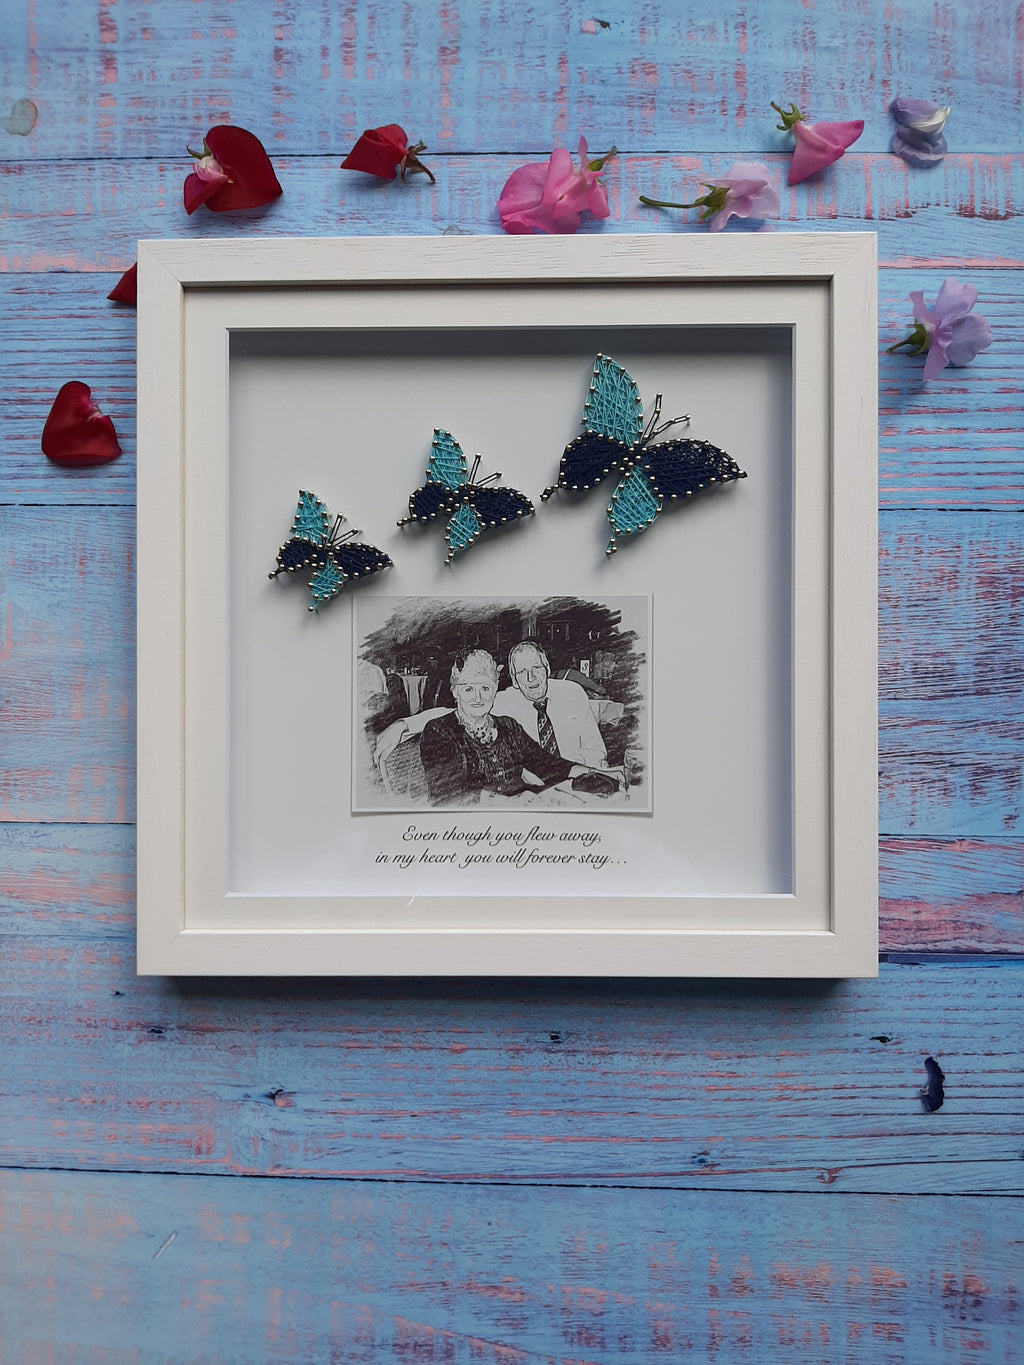 Butterfly - lost loved one remembrance gift